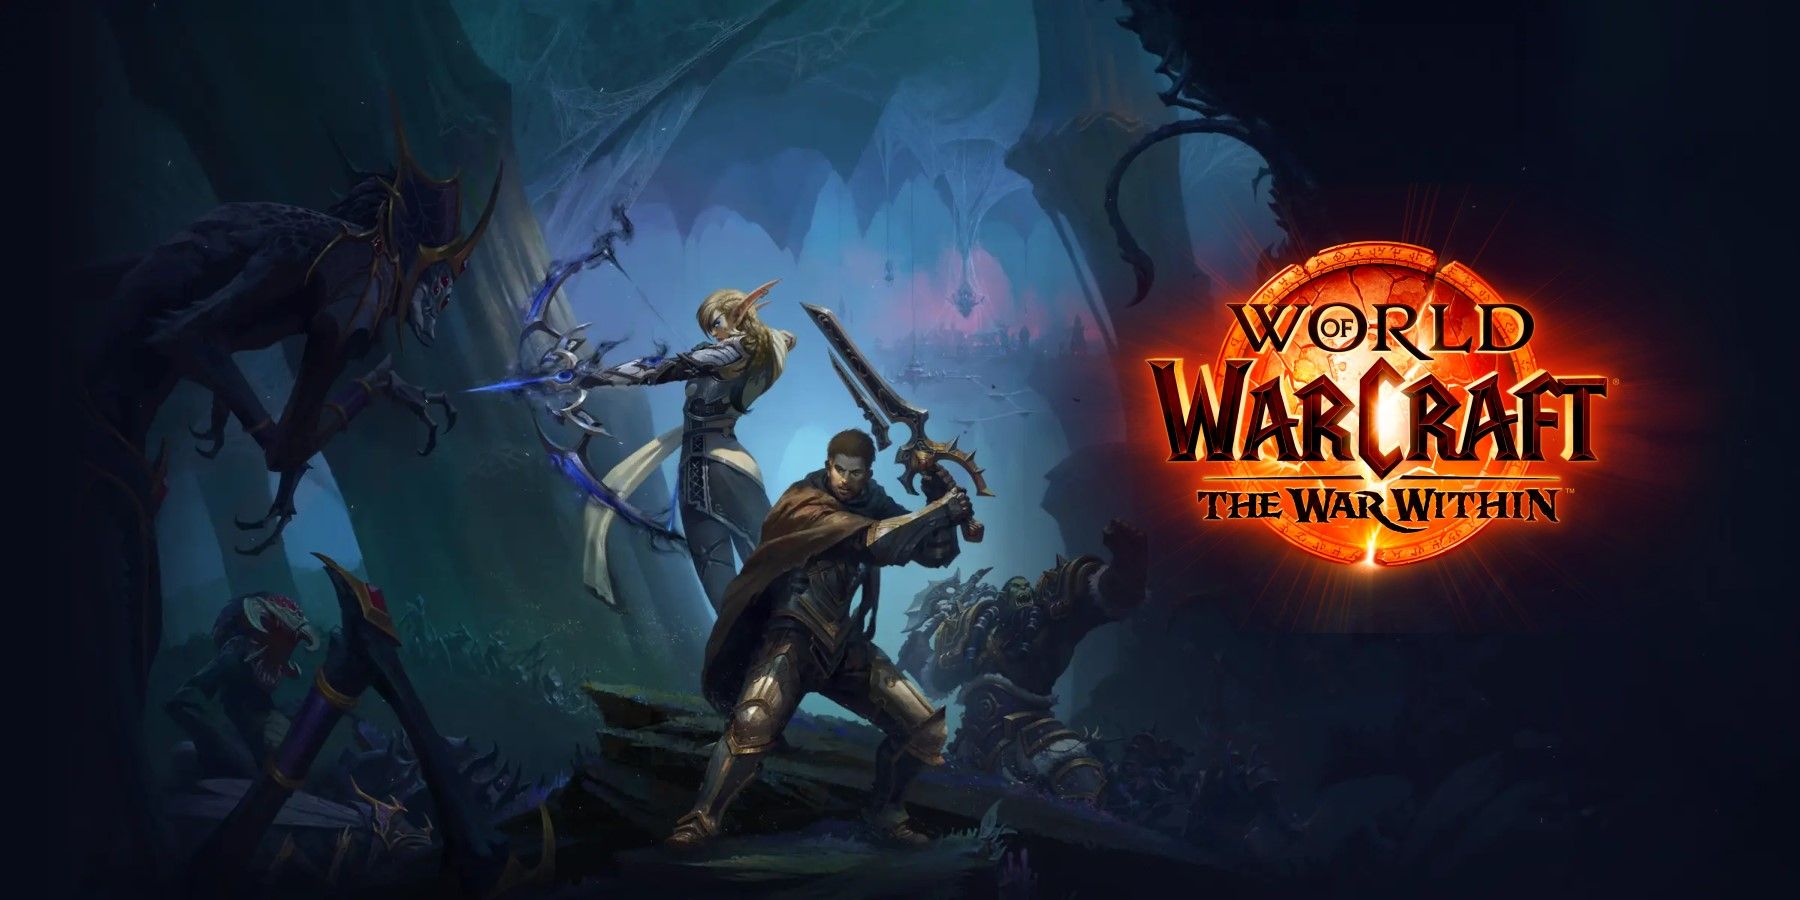 alleria anduin and thrall fighting nerubians next to the war within wow logo